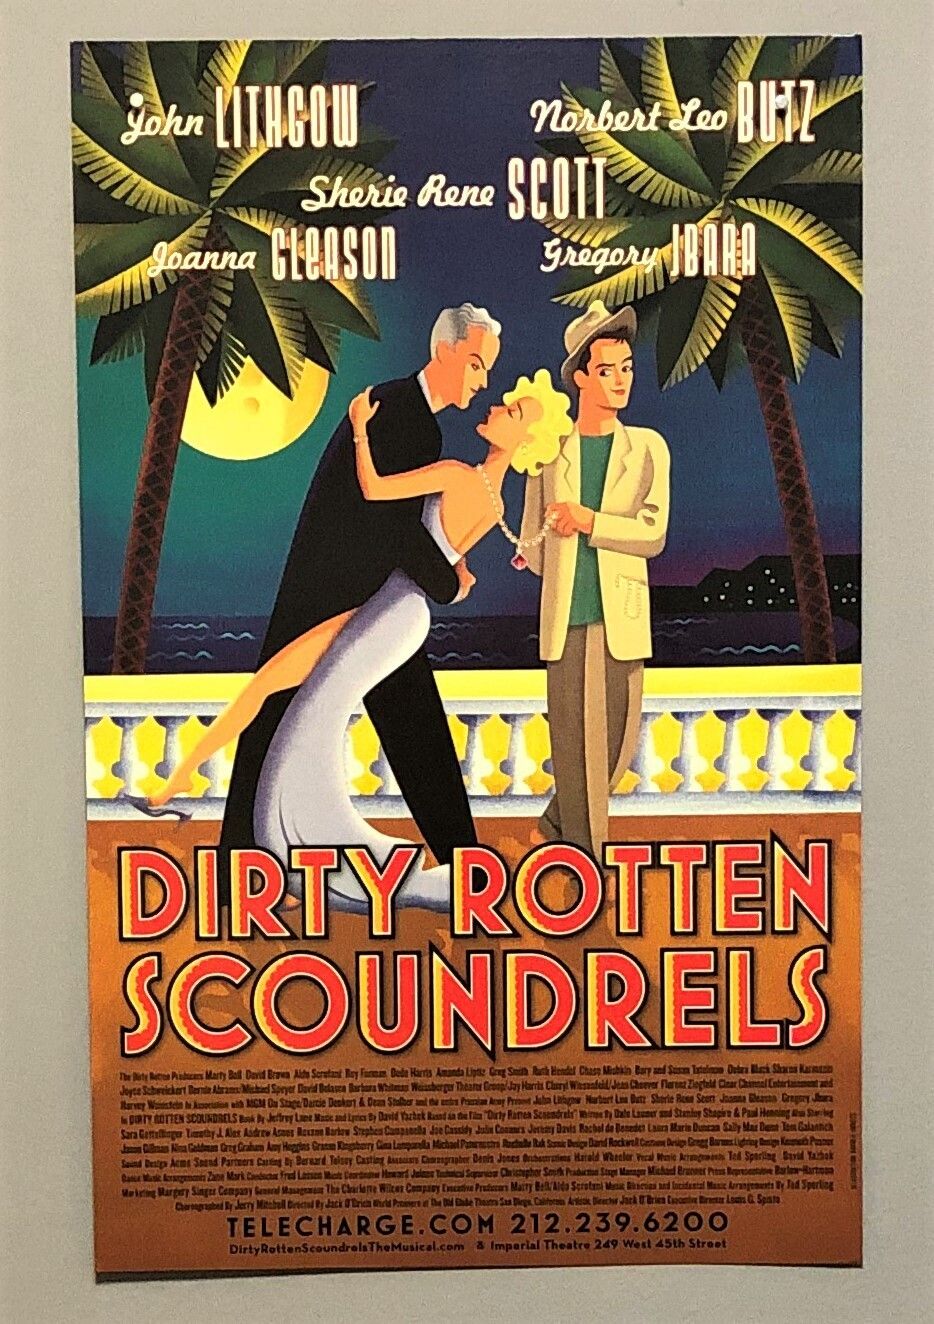 Theater dirty rotten scoundrels